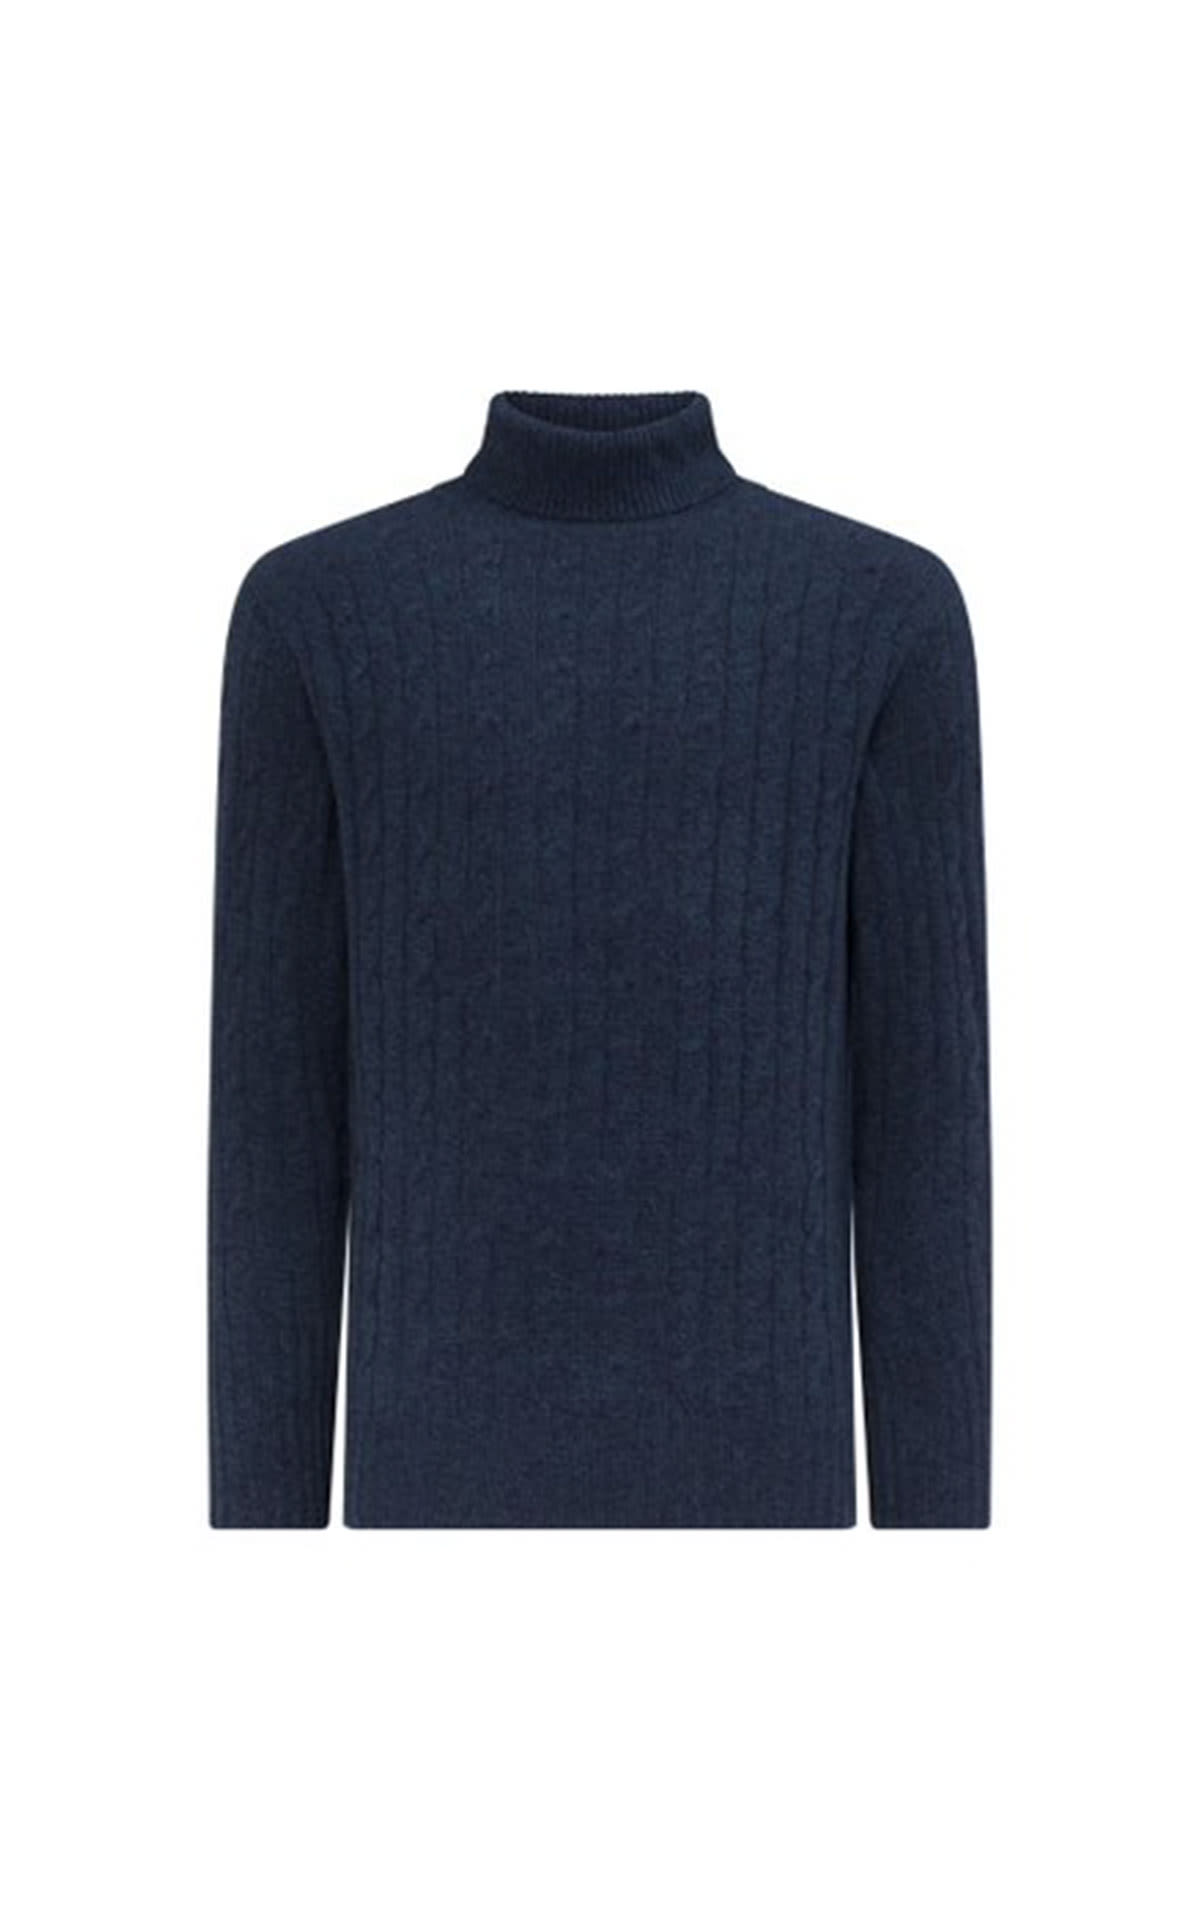 N.Peal Classic cable roll neck french blue from Bicester Village